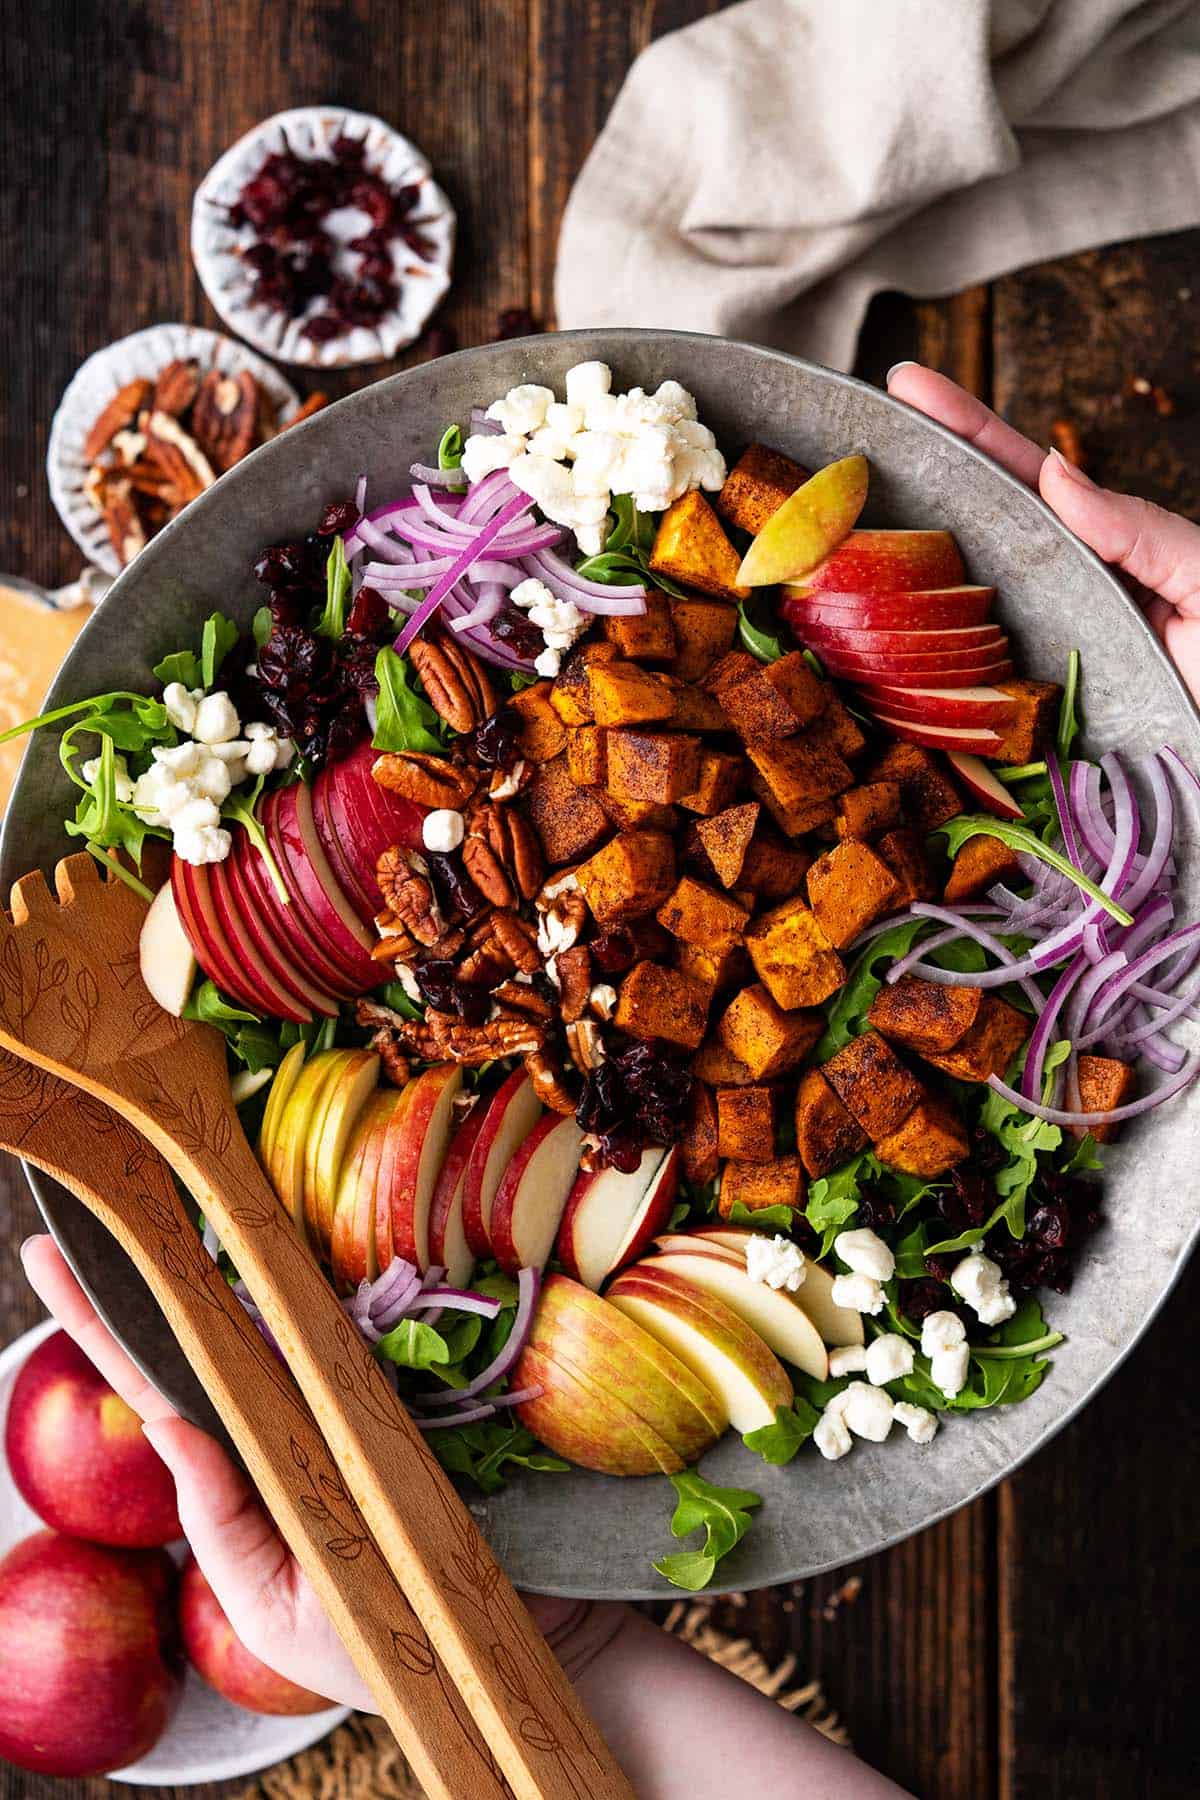 Fall salad with apples and all kinds of veggies